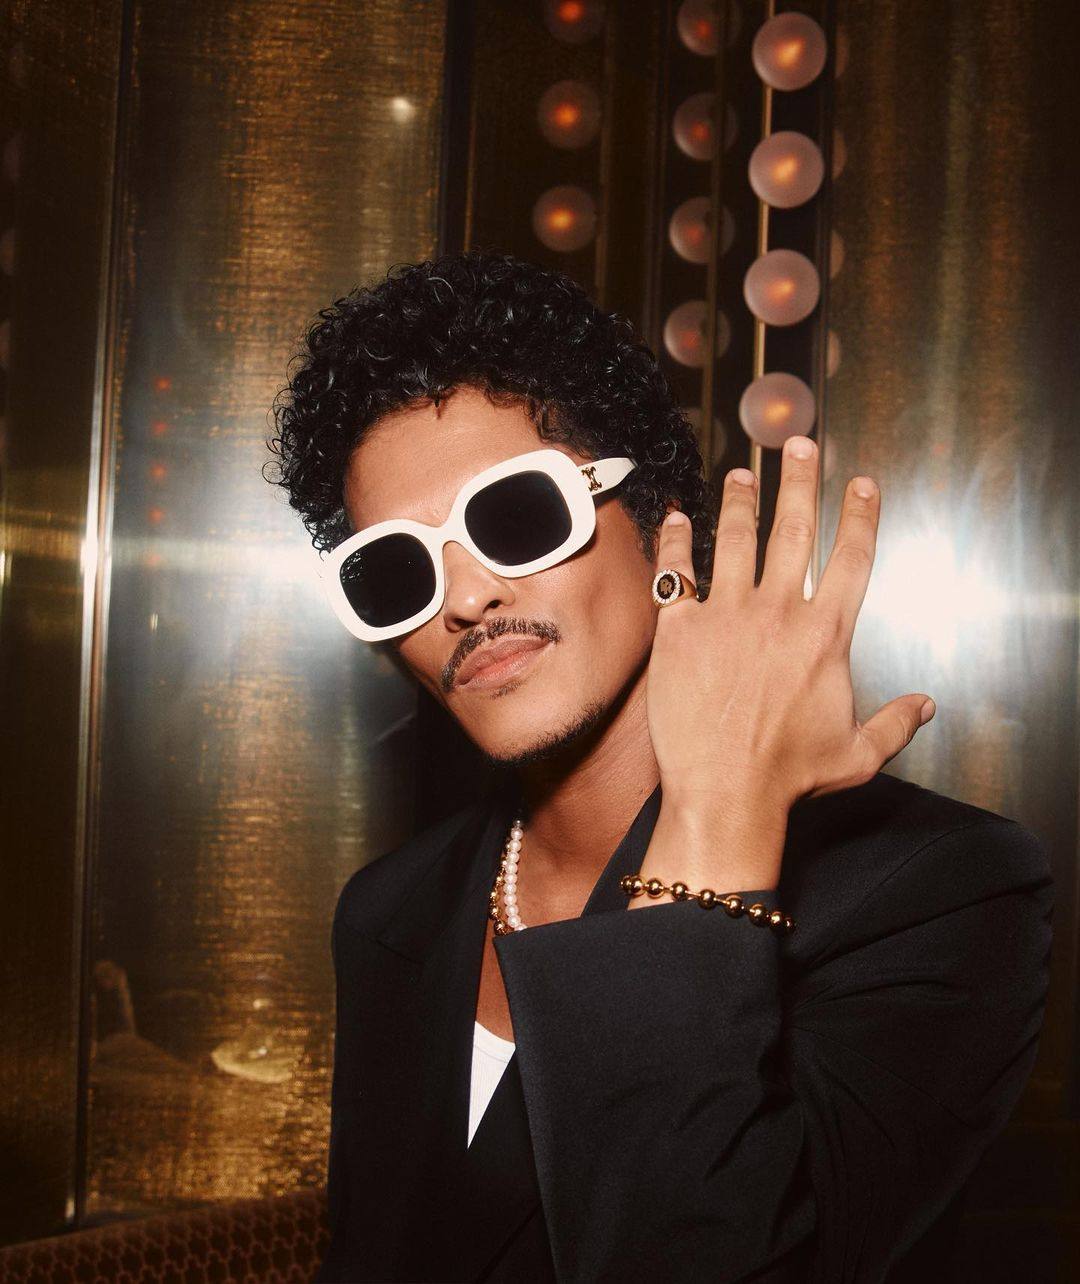 Bruno Mars at the launch of his bar The Pinky Ring in Las Vegas, in February. Photo: @brunomars/Instagram